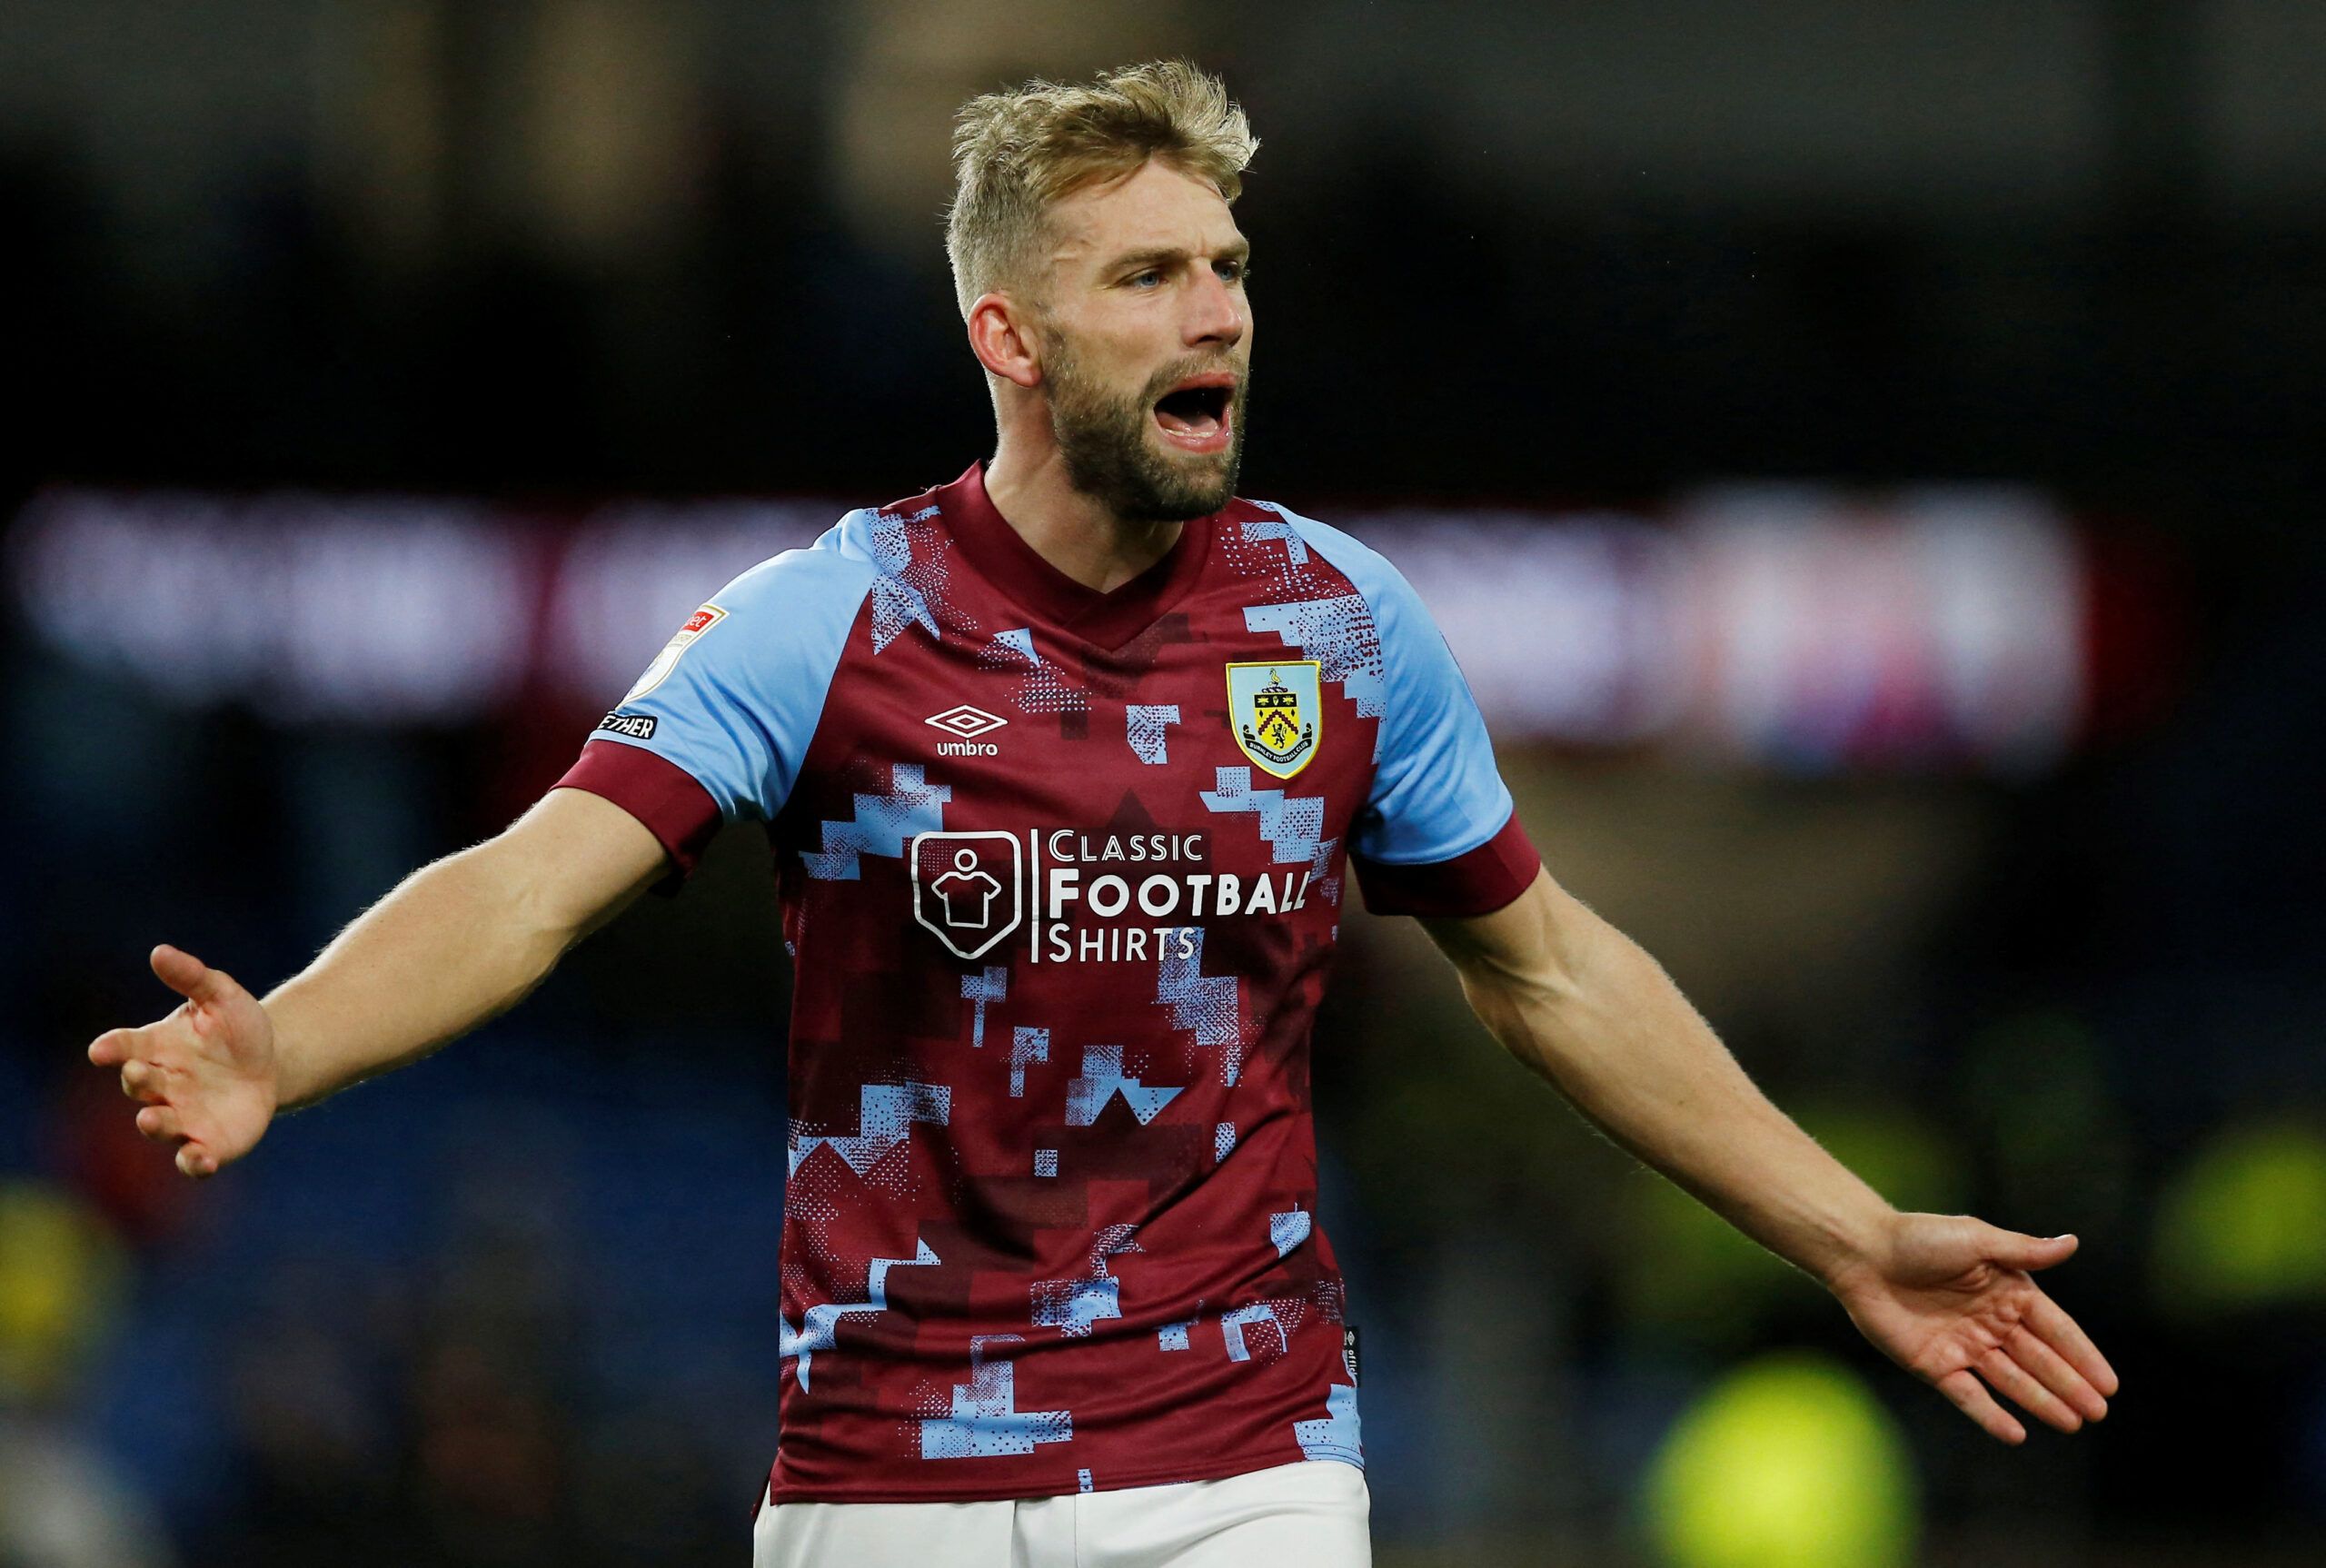 Soccer Football - Carabao Cup Third Round - Burnley v Crawley Town - Turf Moor, Burnley, Britain - November 8, 2022 Burnley's Charlie Taylor reacts   Action Images/Craig Brough  EDITORIAL USE ONLY. No use with unauthorized audio, video, data, fixture lists, club/league logos or 